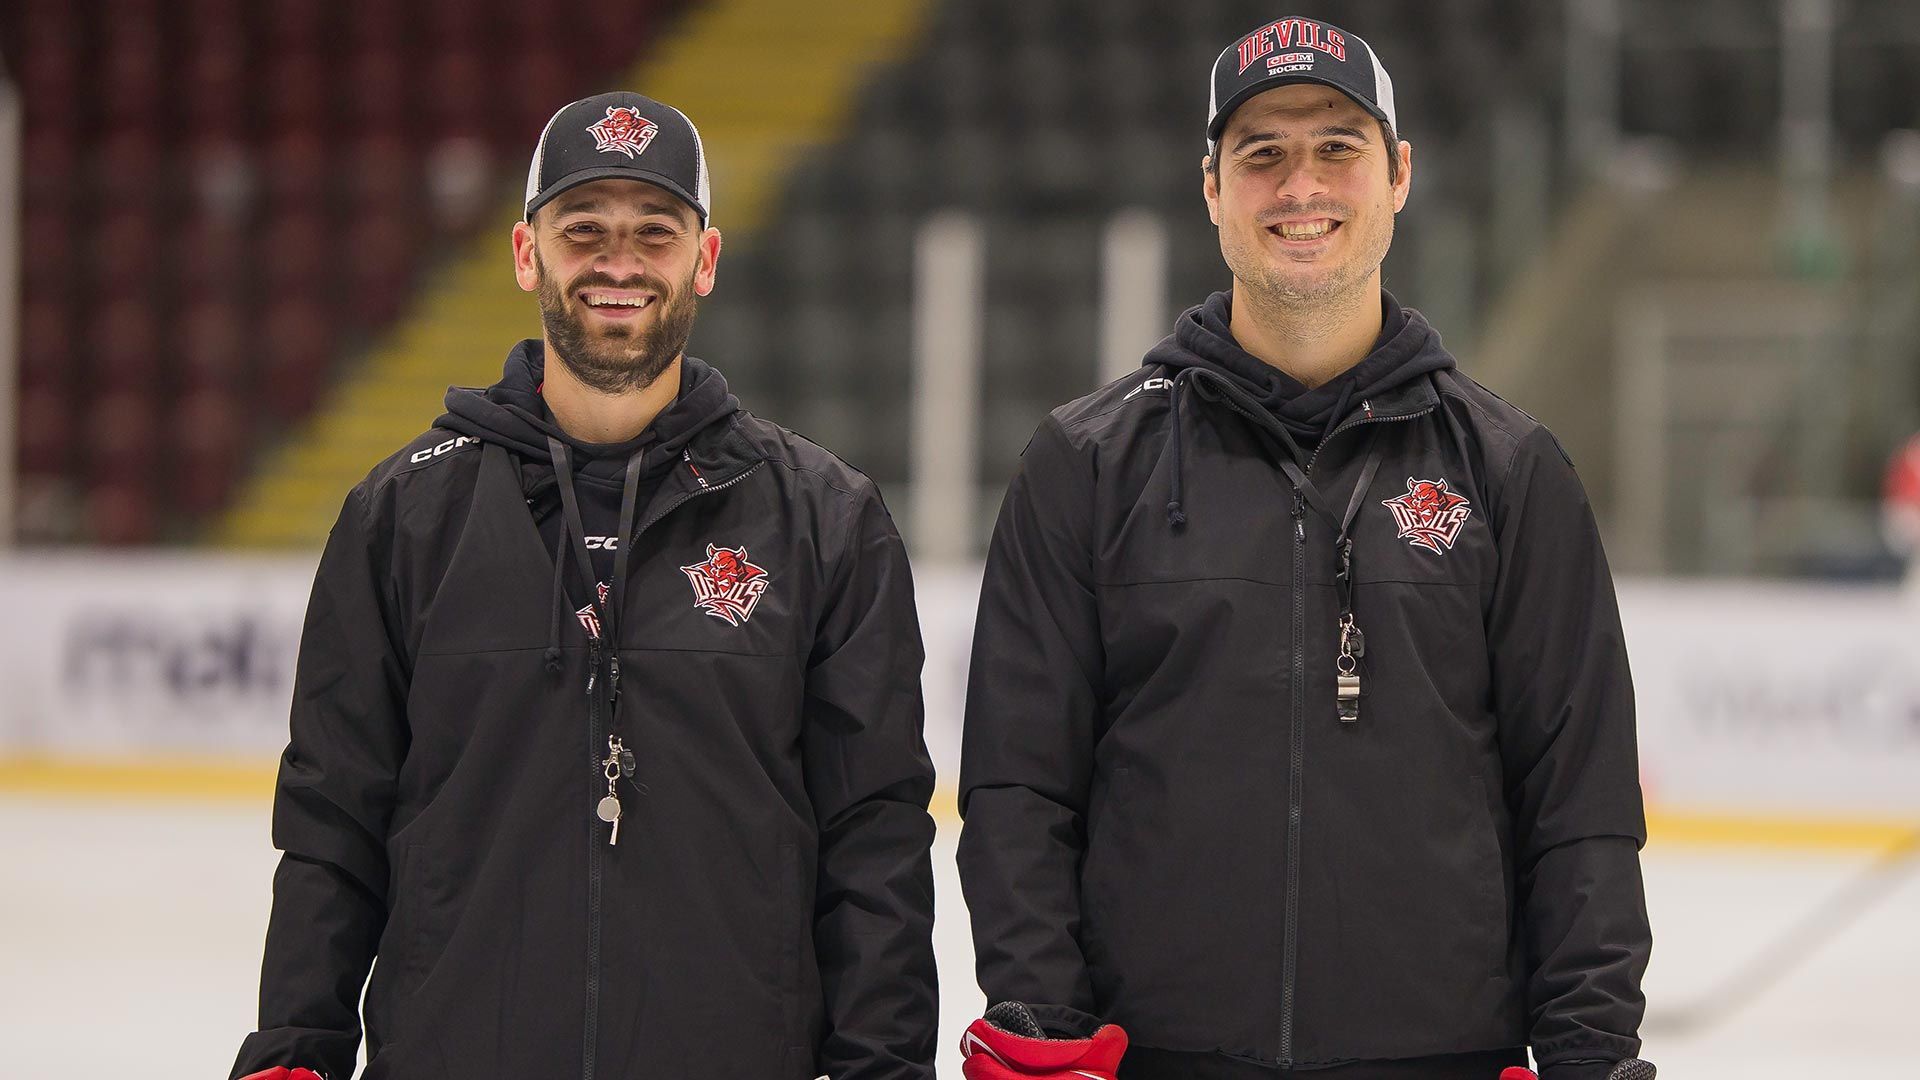 Christian Horn (right) with Brodie Dupont at Cardiff Devils training (Image: Cardiff Devils)